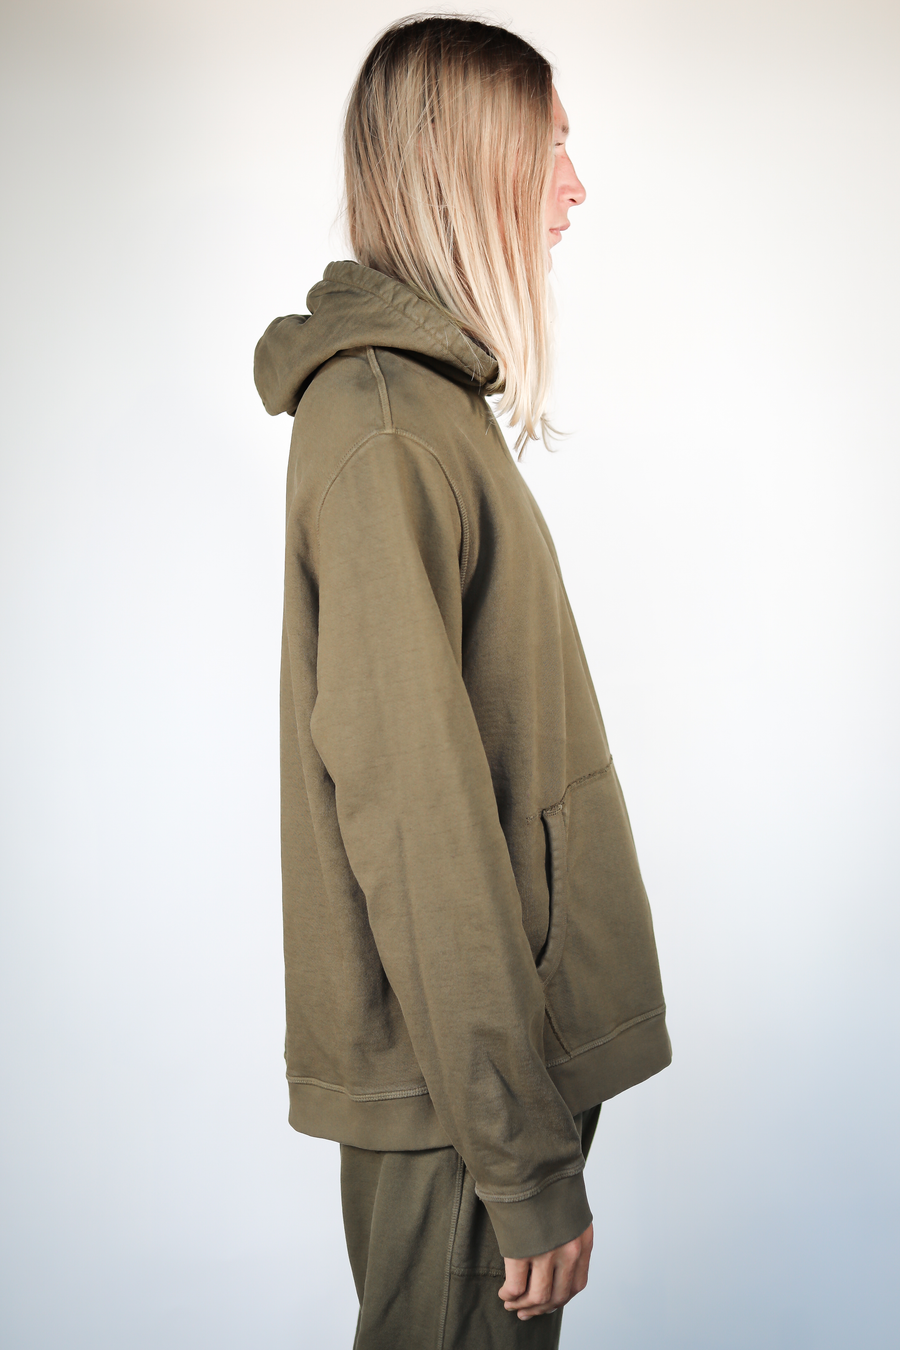 Select Pullover Hoody Dark Olive